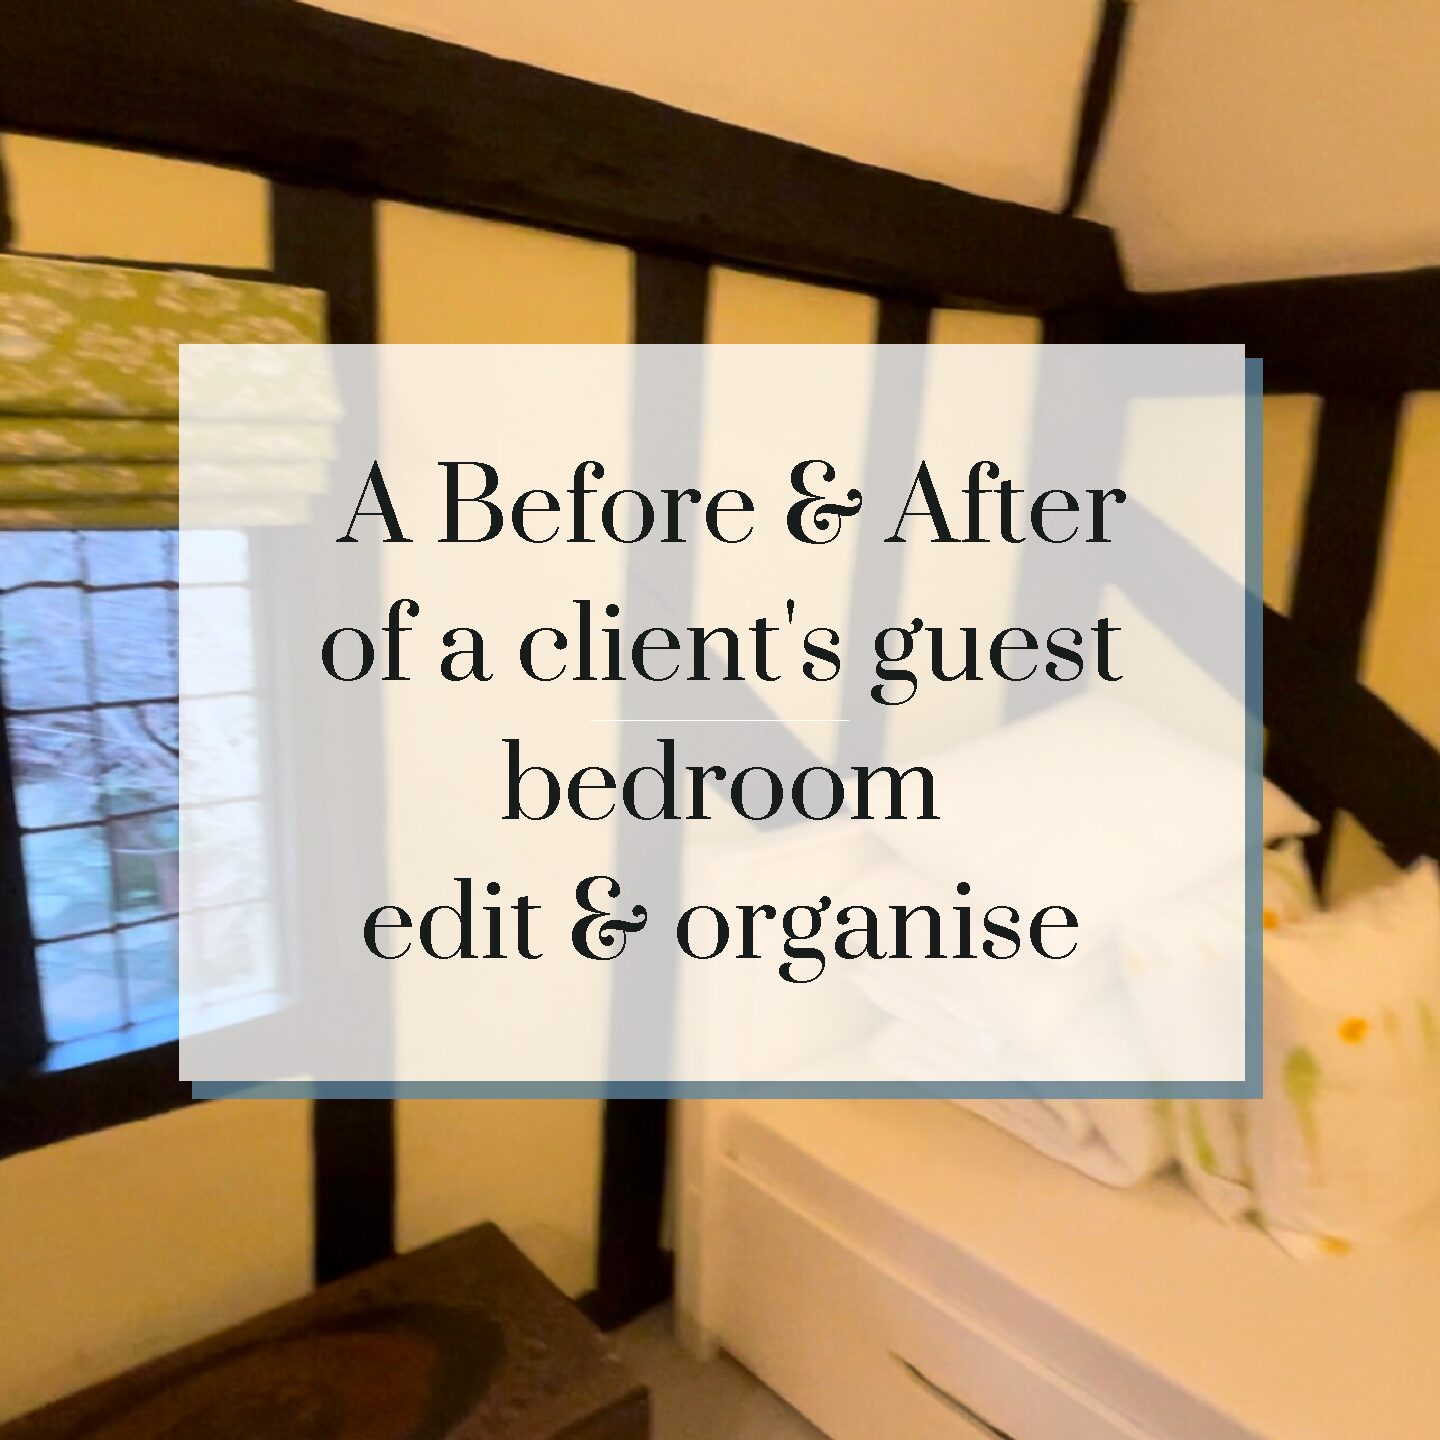 A Before & After of a client’s guest bedroom edit & organise